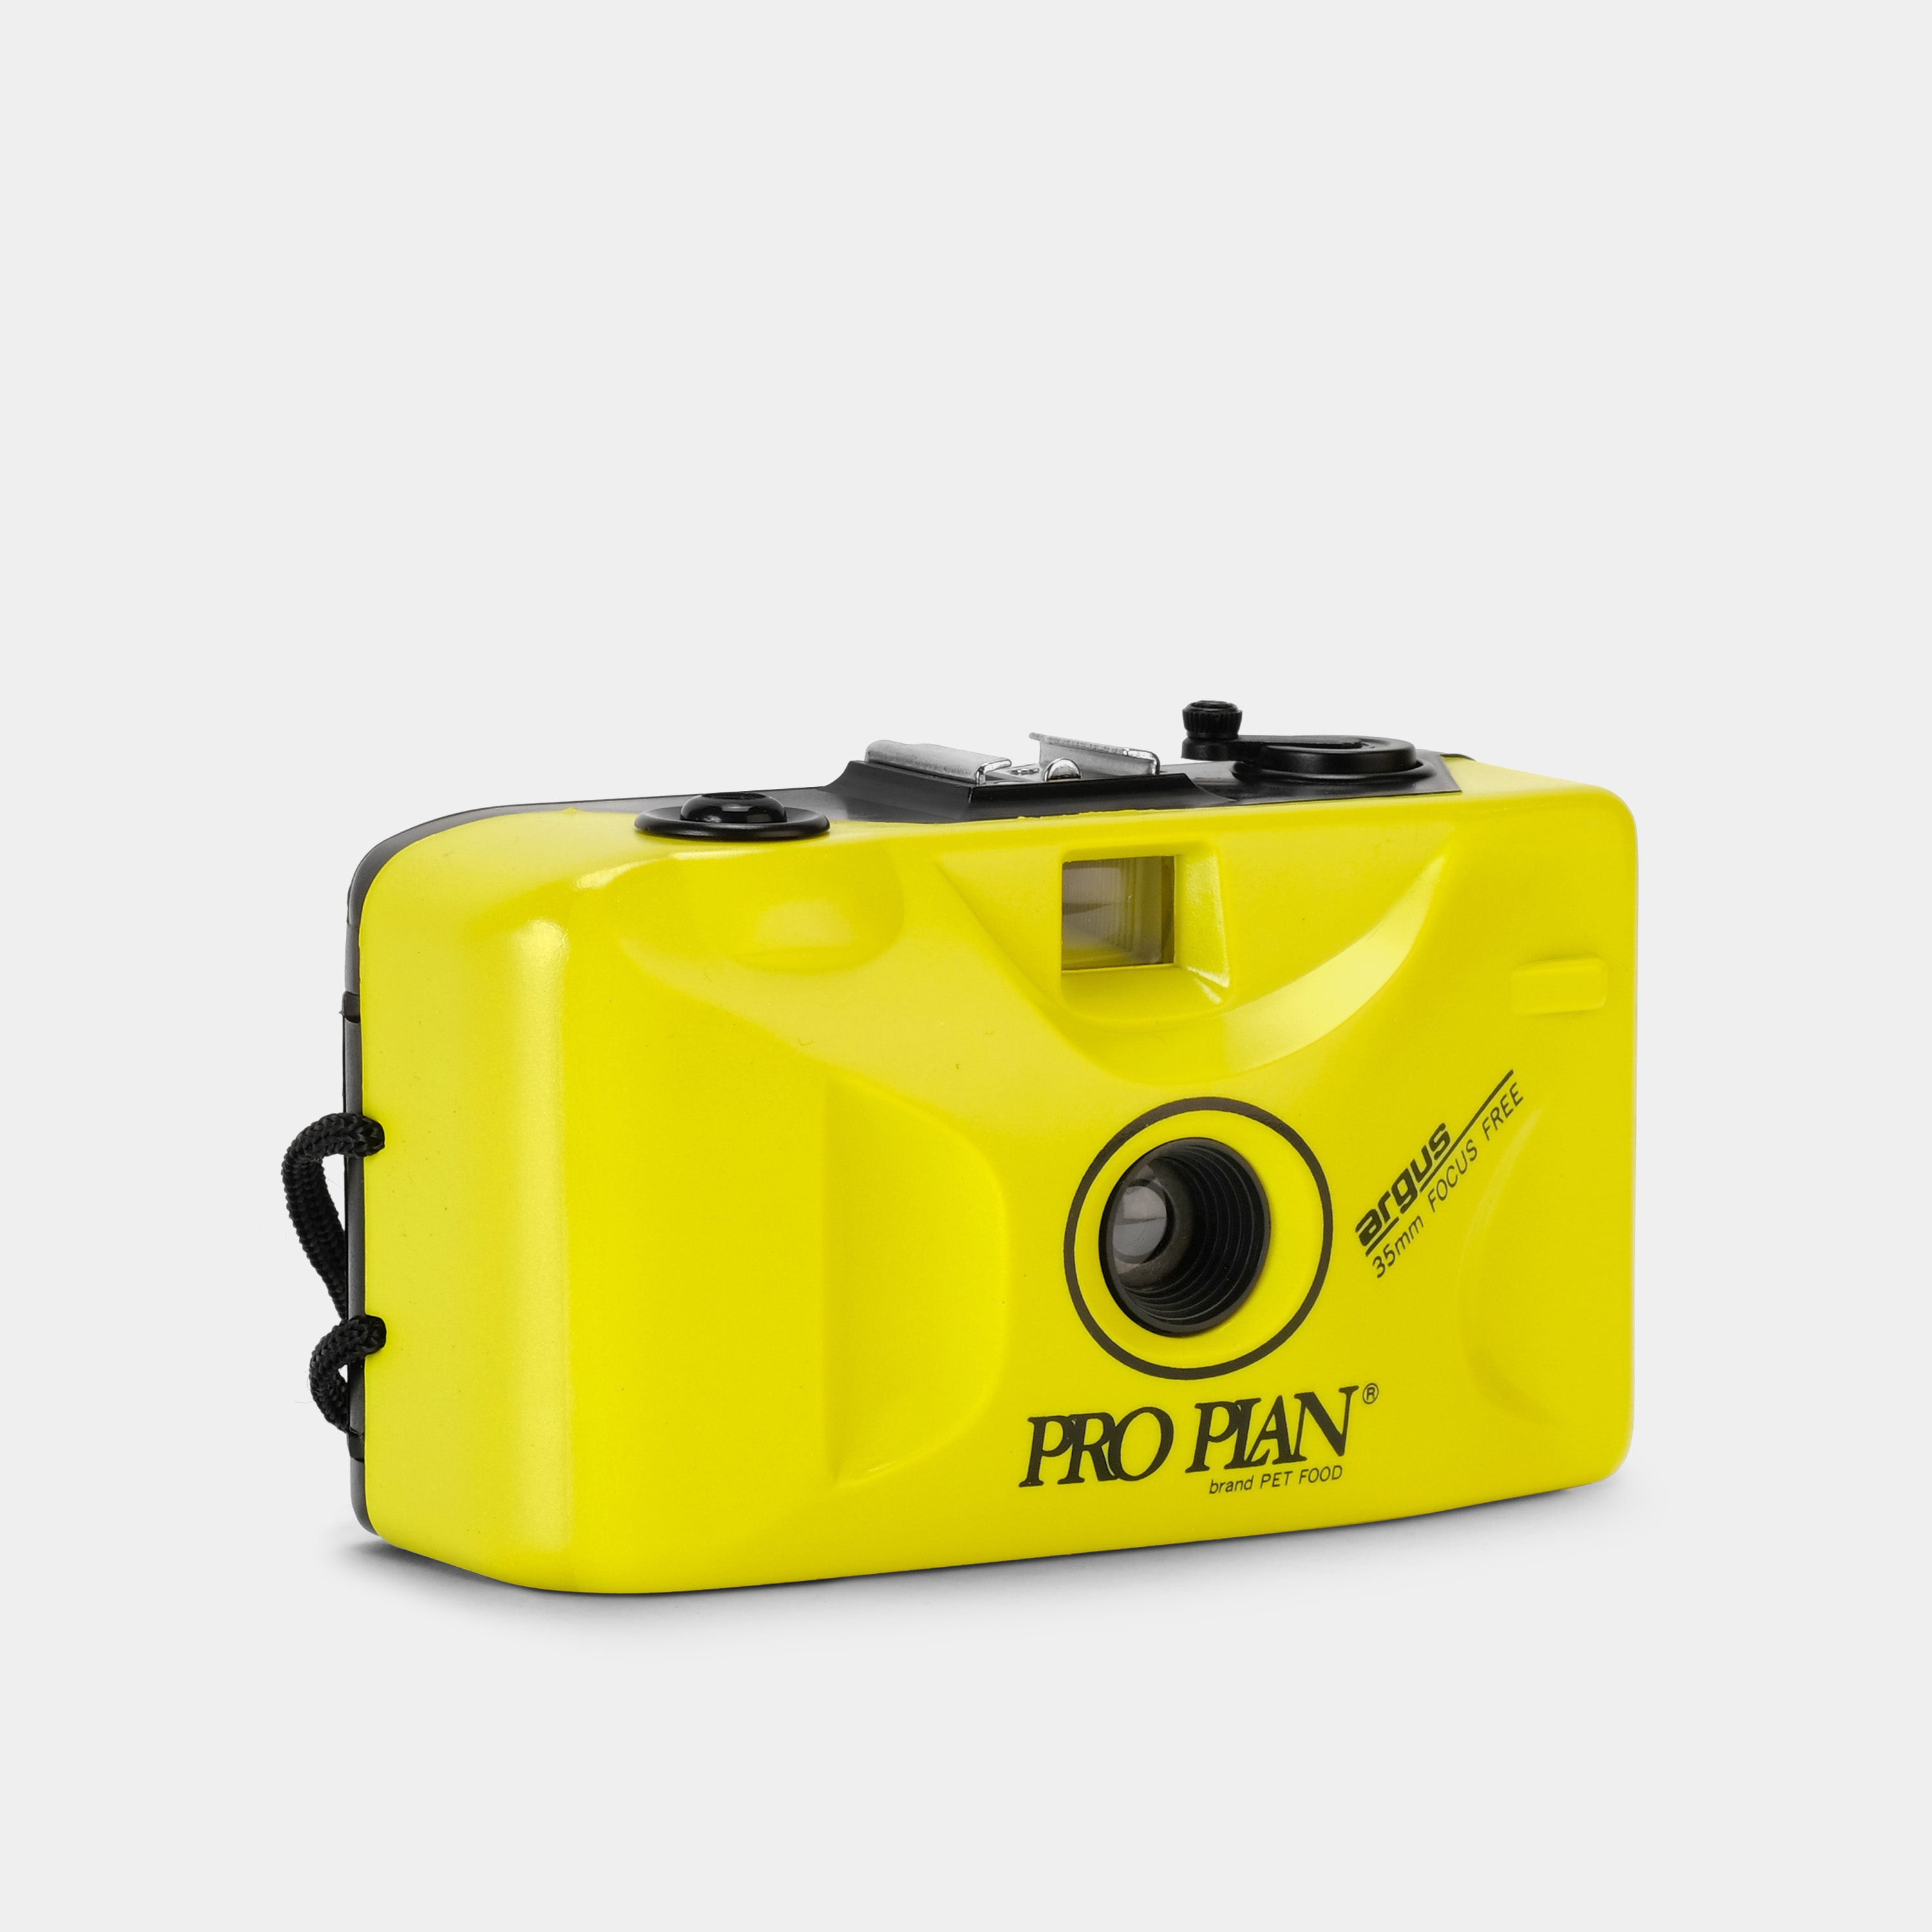 Argus PRO PLAN Yellow 35mm Point And Shoot Film Camera